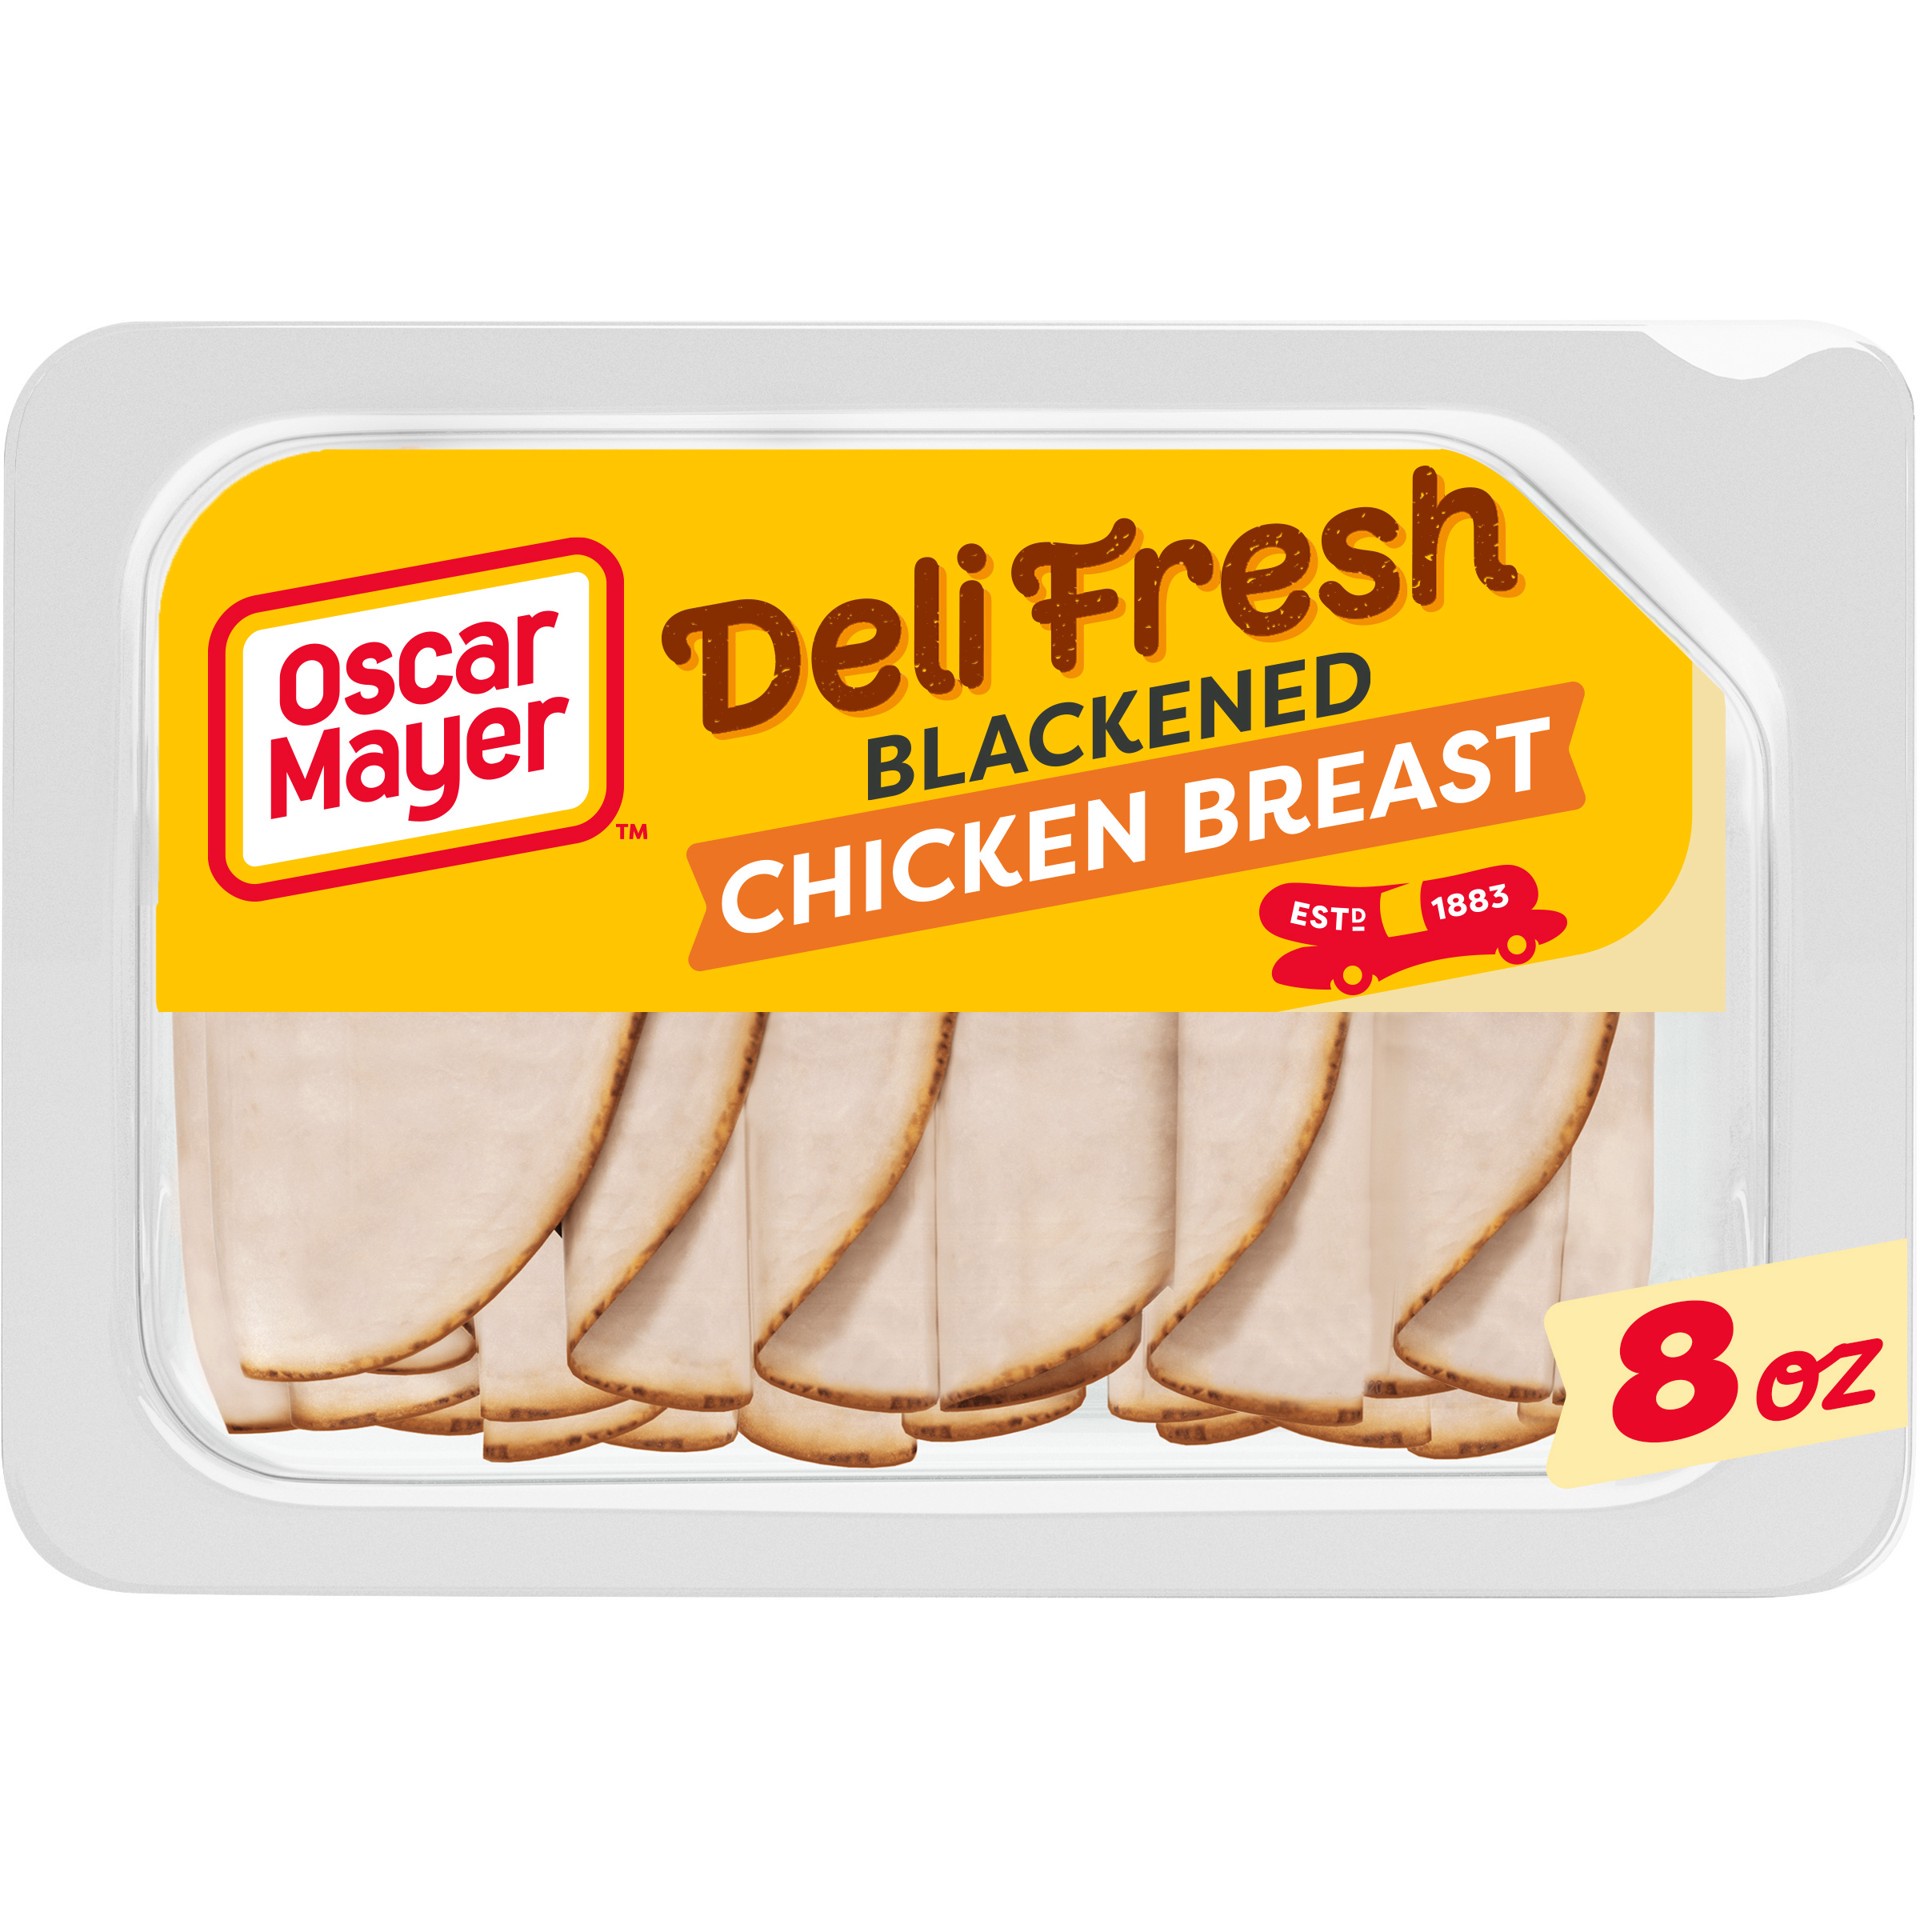 slide 1 of 9, Oscar Mayer Deli Fresh Blackened Chicken Breast Coated with Red Bell Pepper, Paprika and other Seasonings Browned with Caramel Color Sliced Lunch Meat, 8 oz. Tray, 8 oz